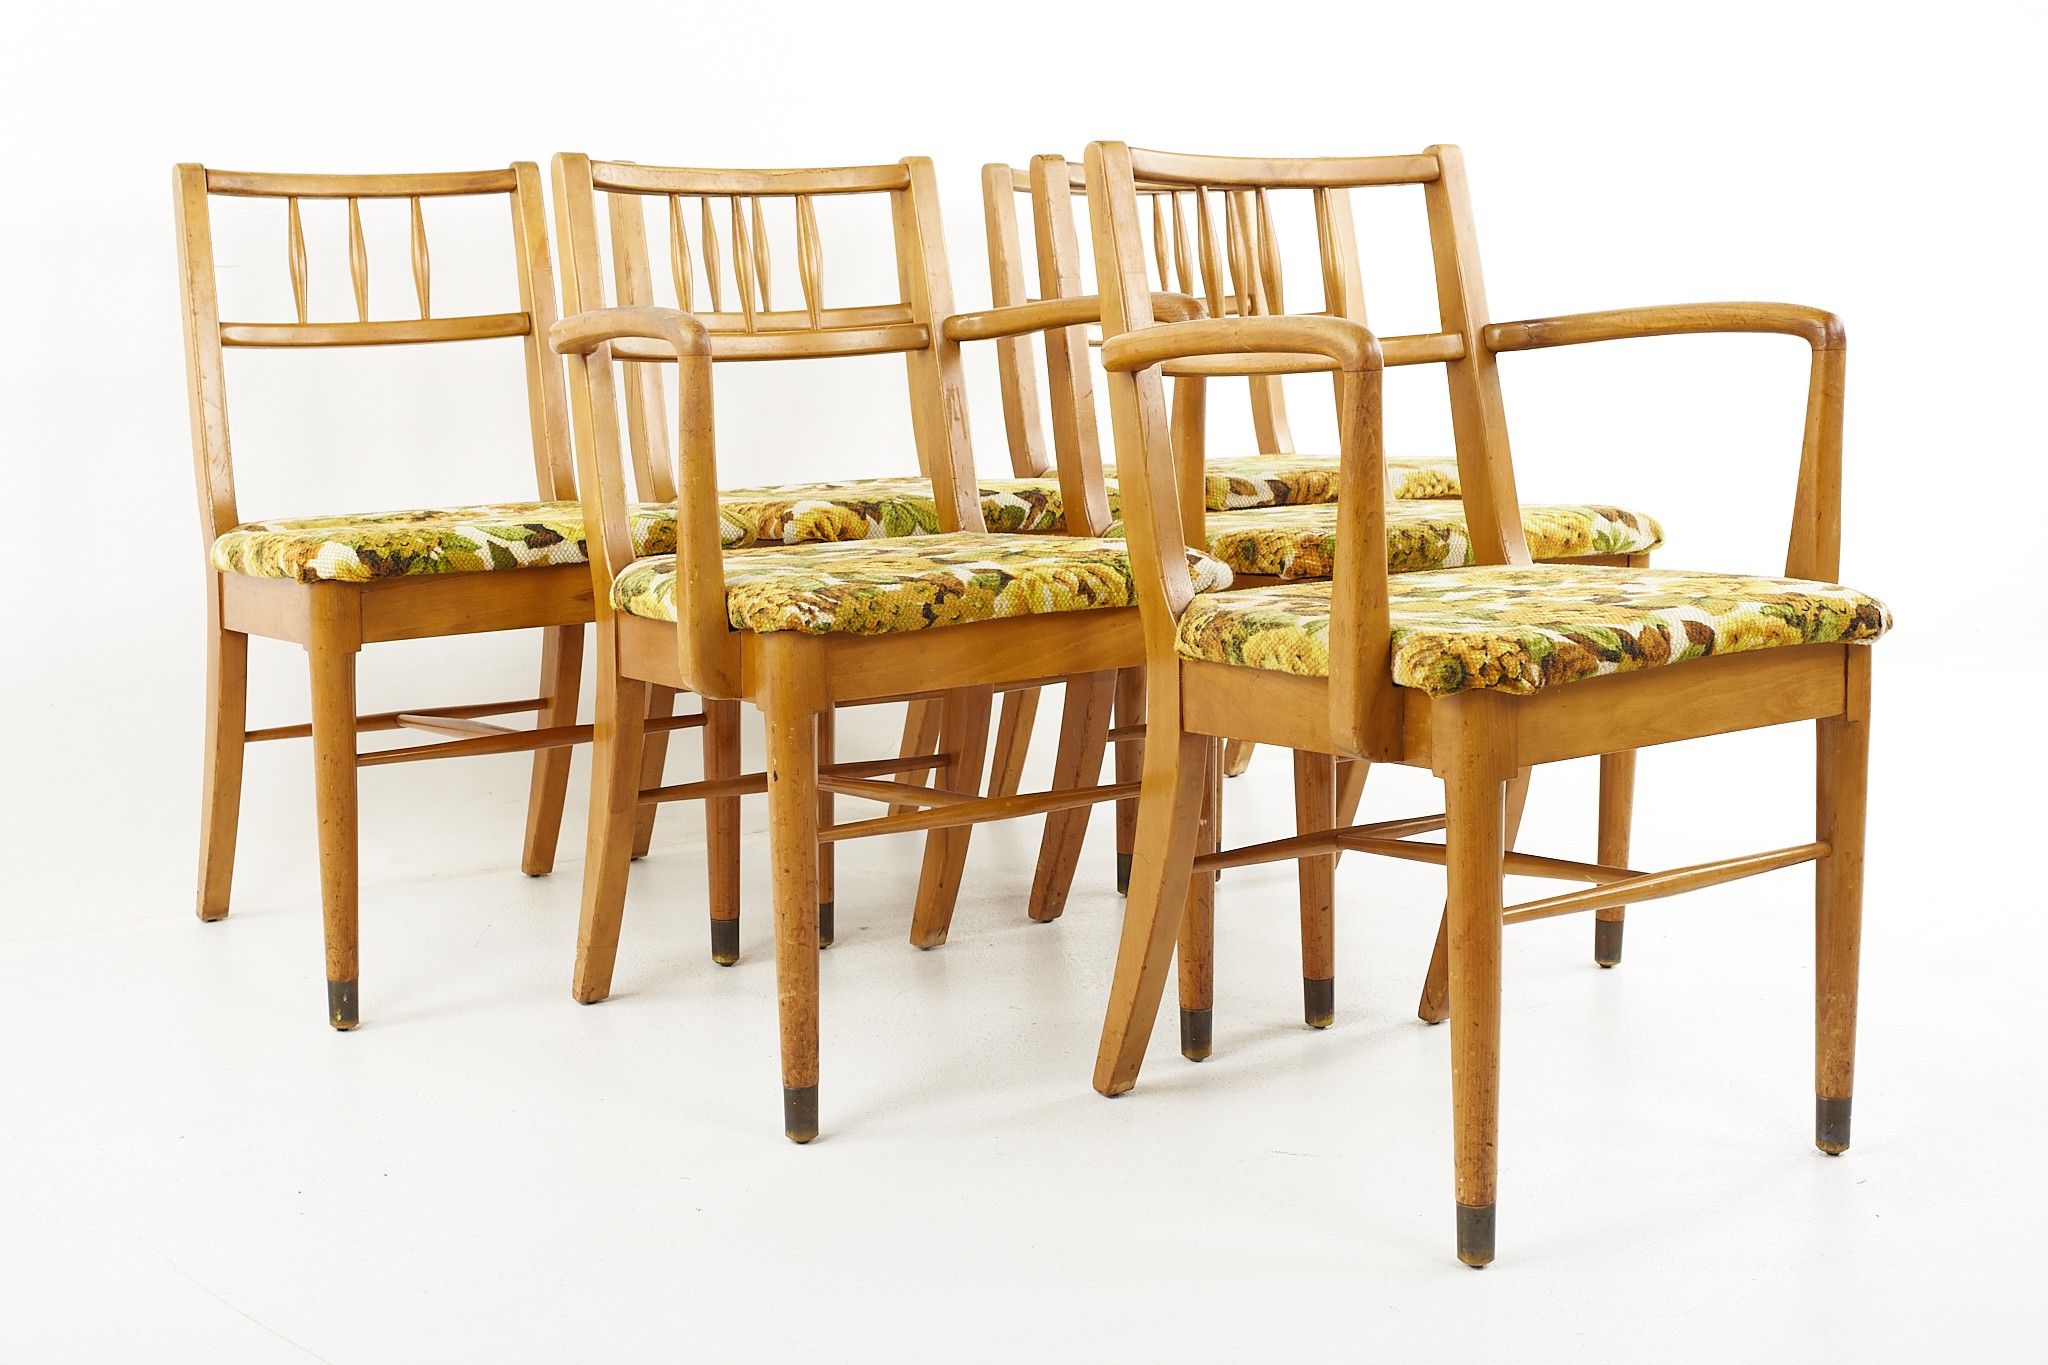 Milo Baughman for Drexel Todays Living Mid Century Dining Chairs - Set of 6